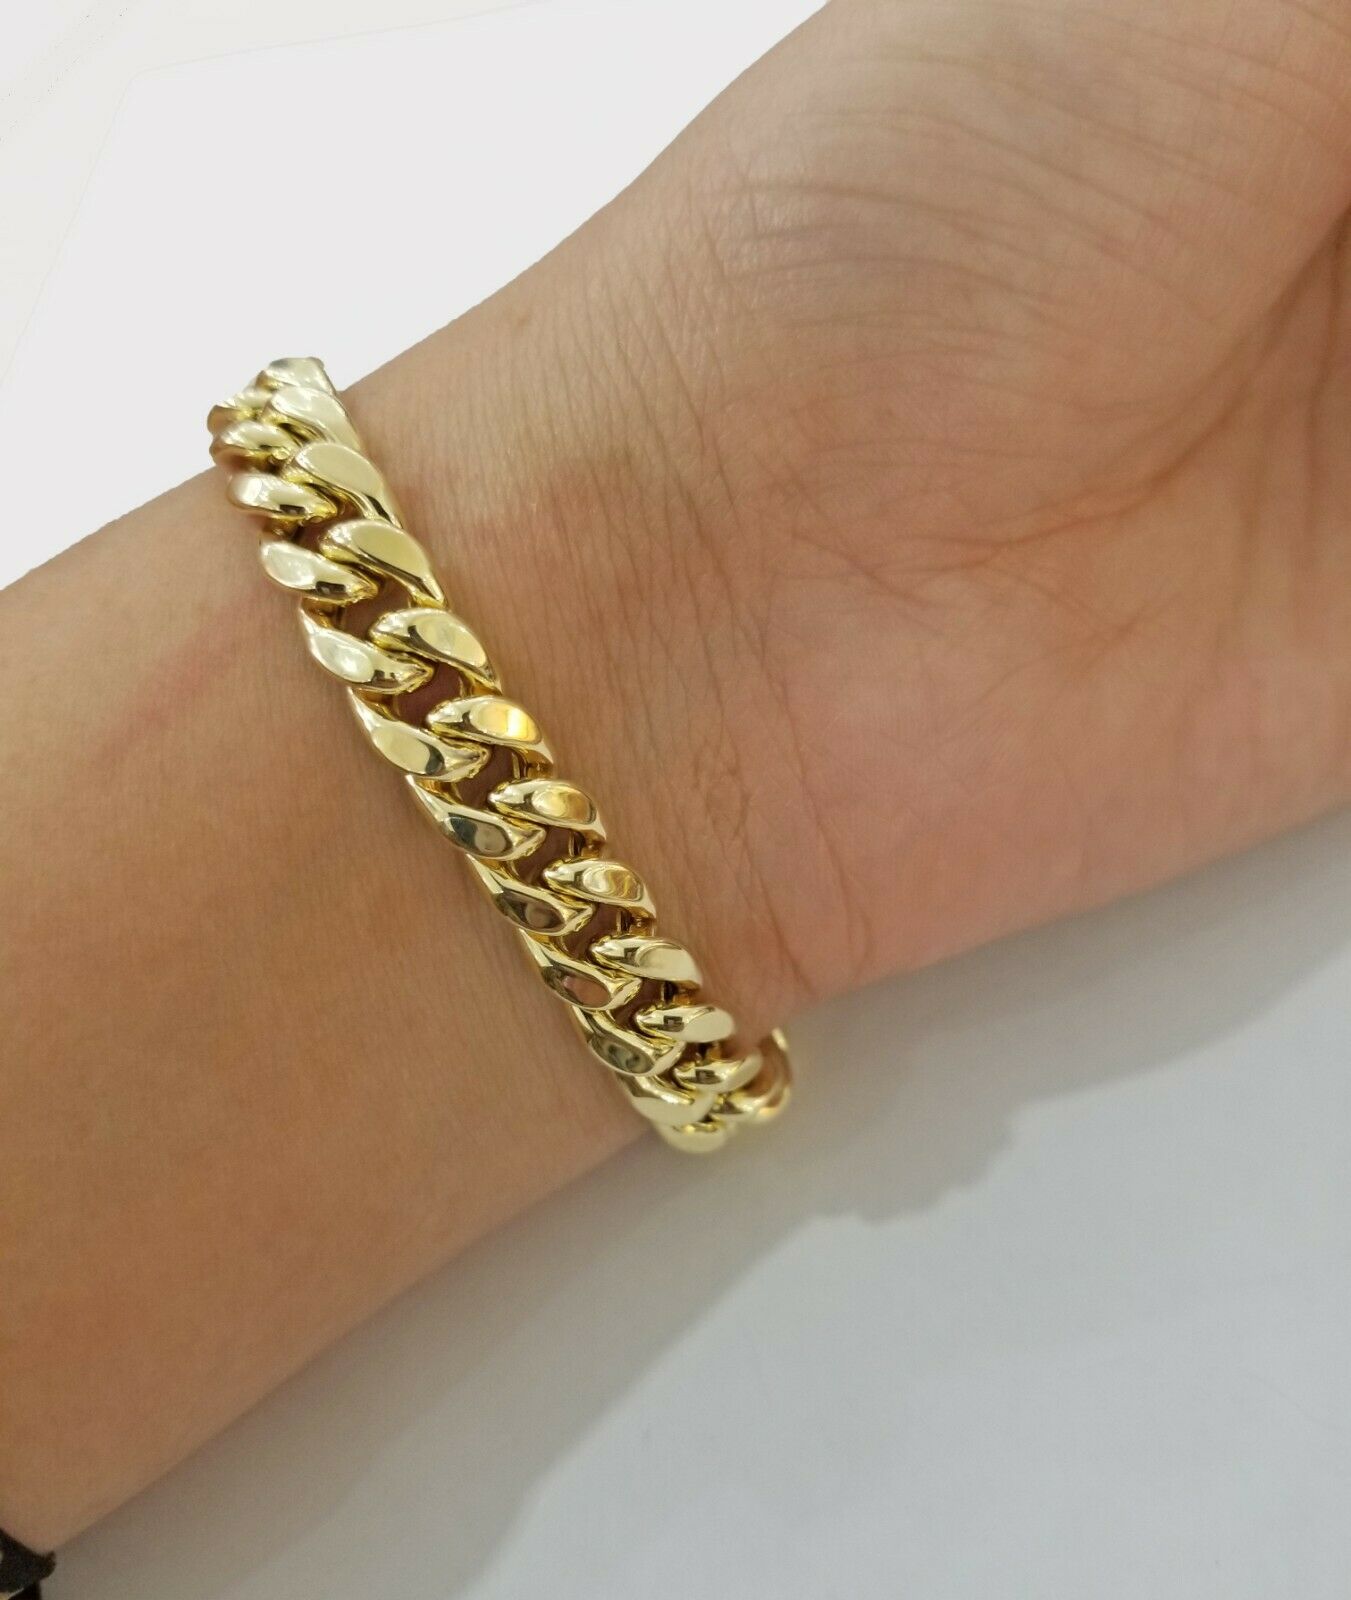 REAL GOLD Bracelet 14KT Miami Cuban Link 8" 9mm Box Clasp Yellow 14kt Gold MENS